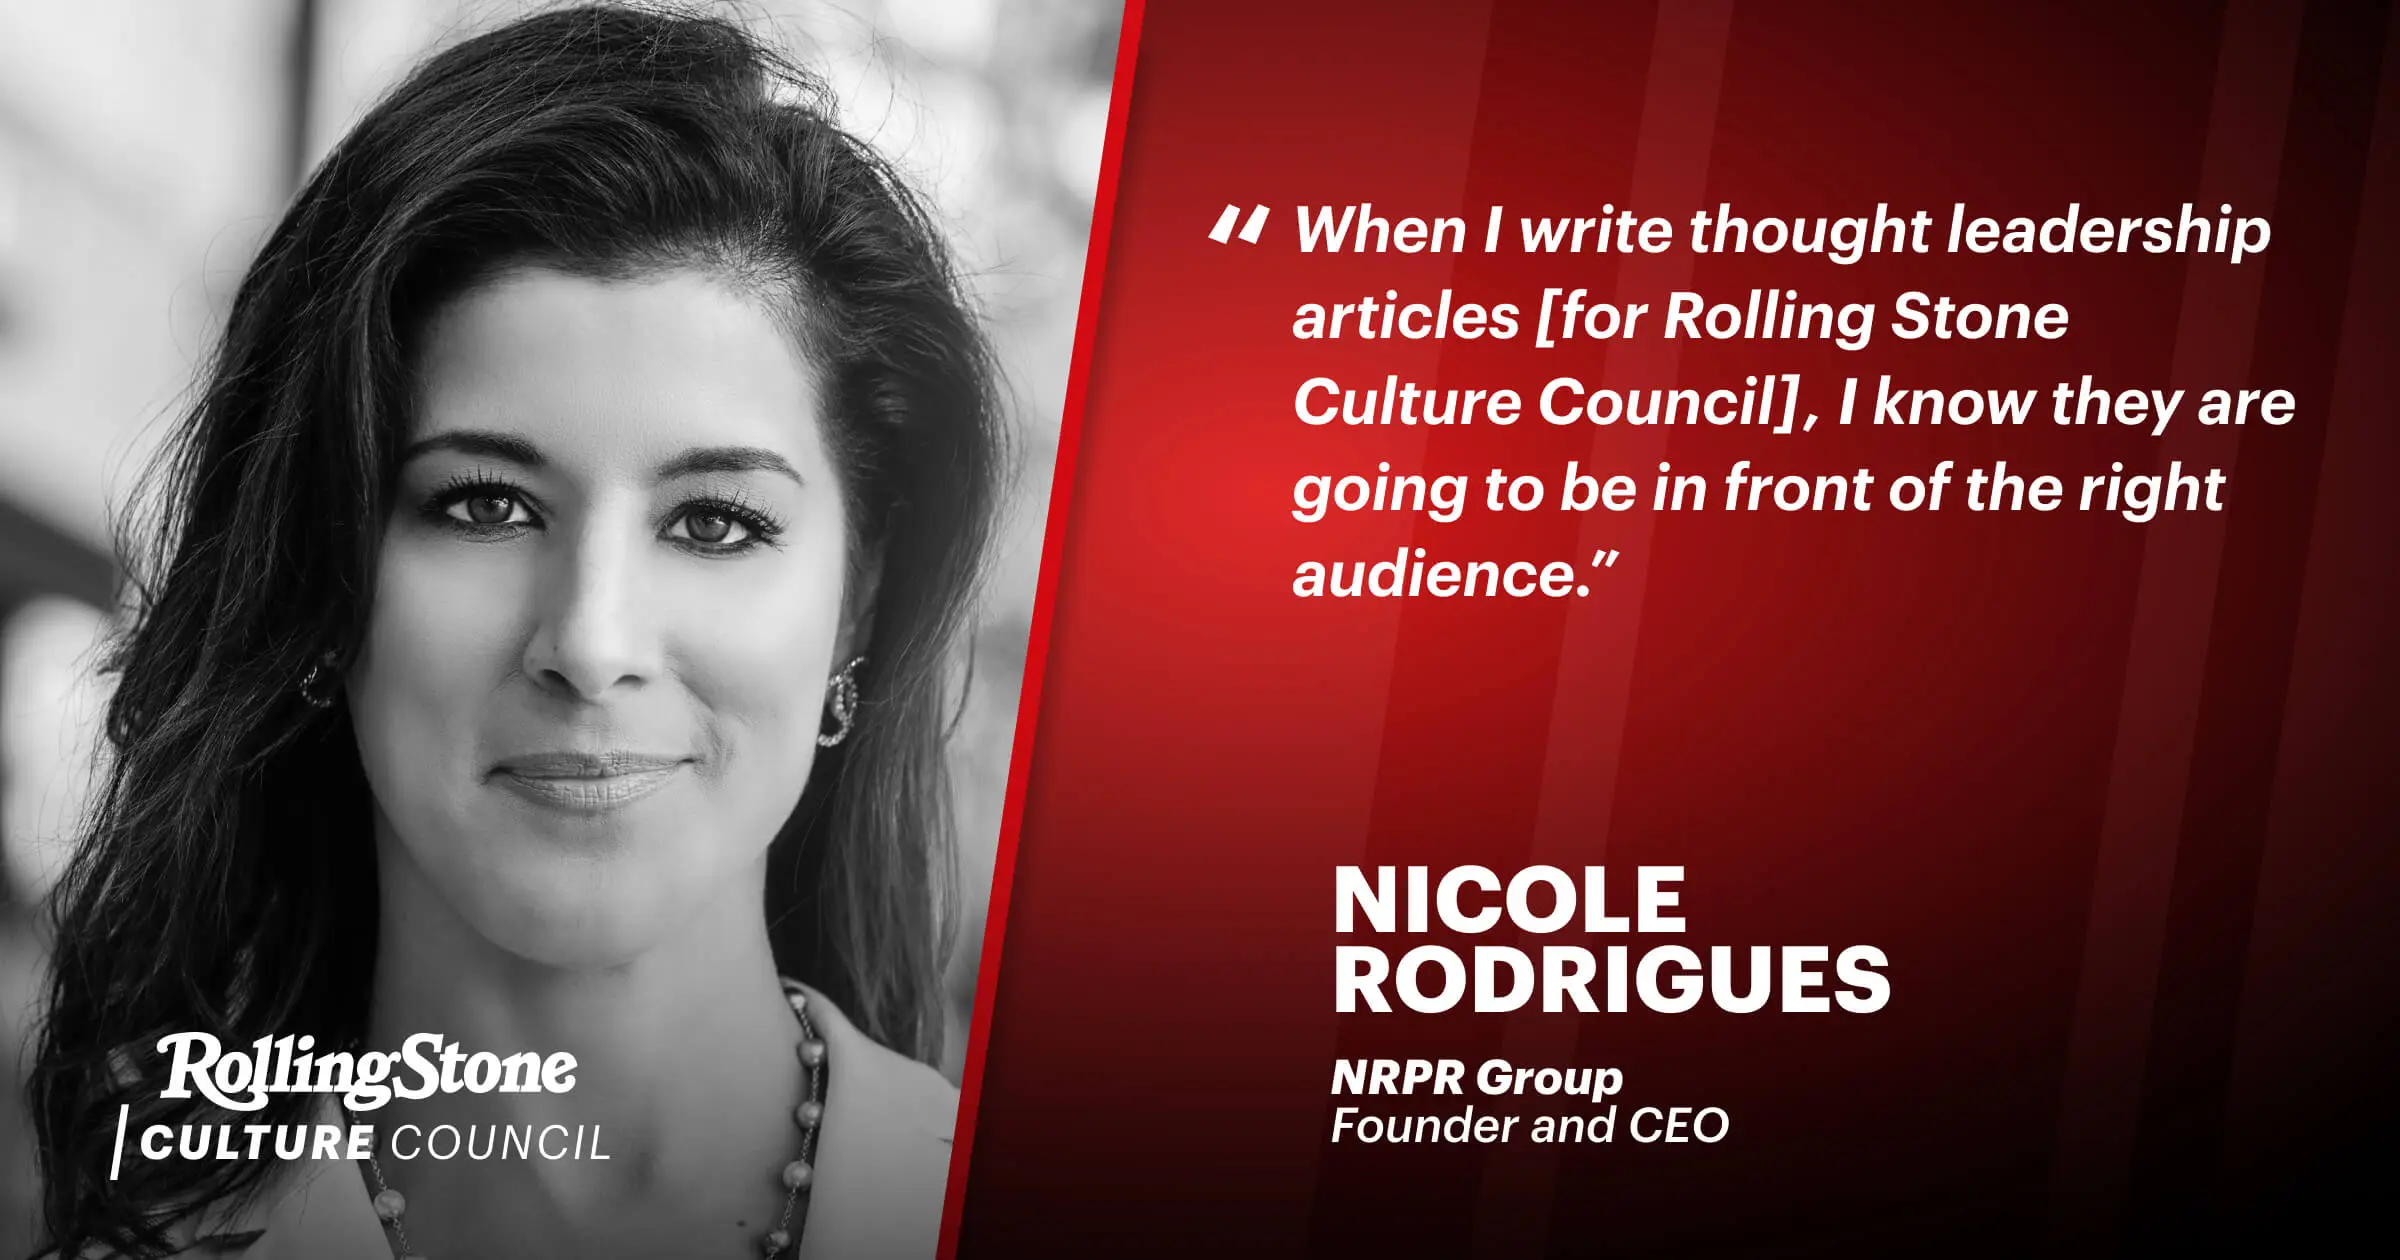 Thought Leadership on Rolling Stone Culture Council Gives Nicole Rodrigues Access to an Influential Audience